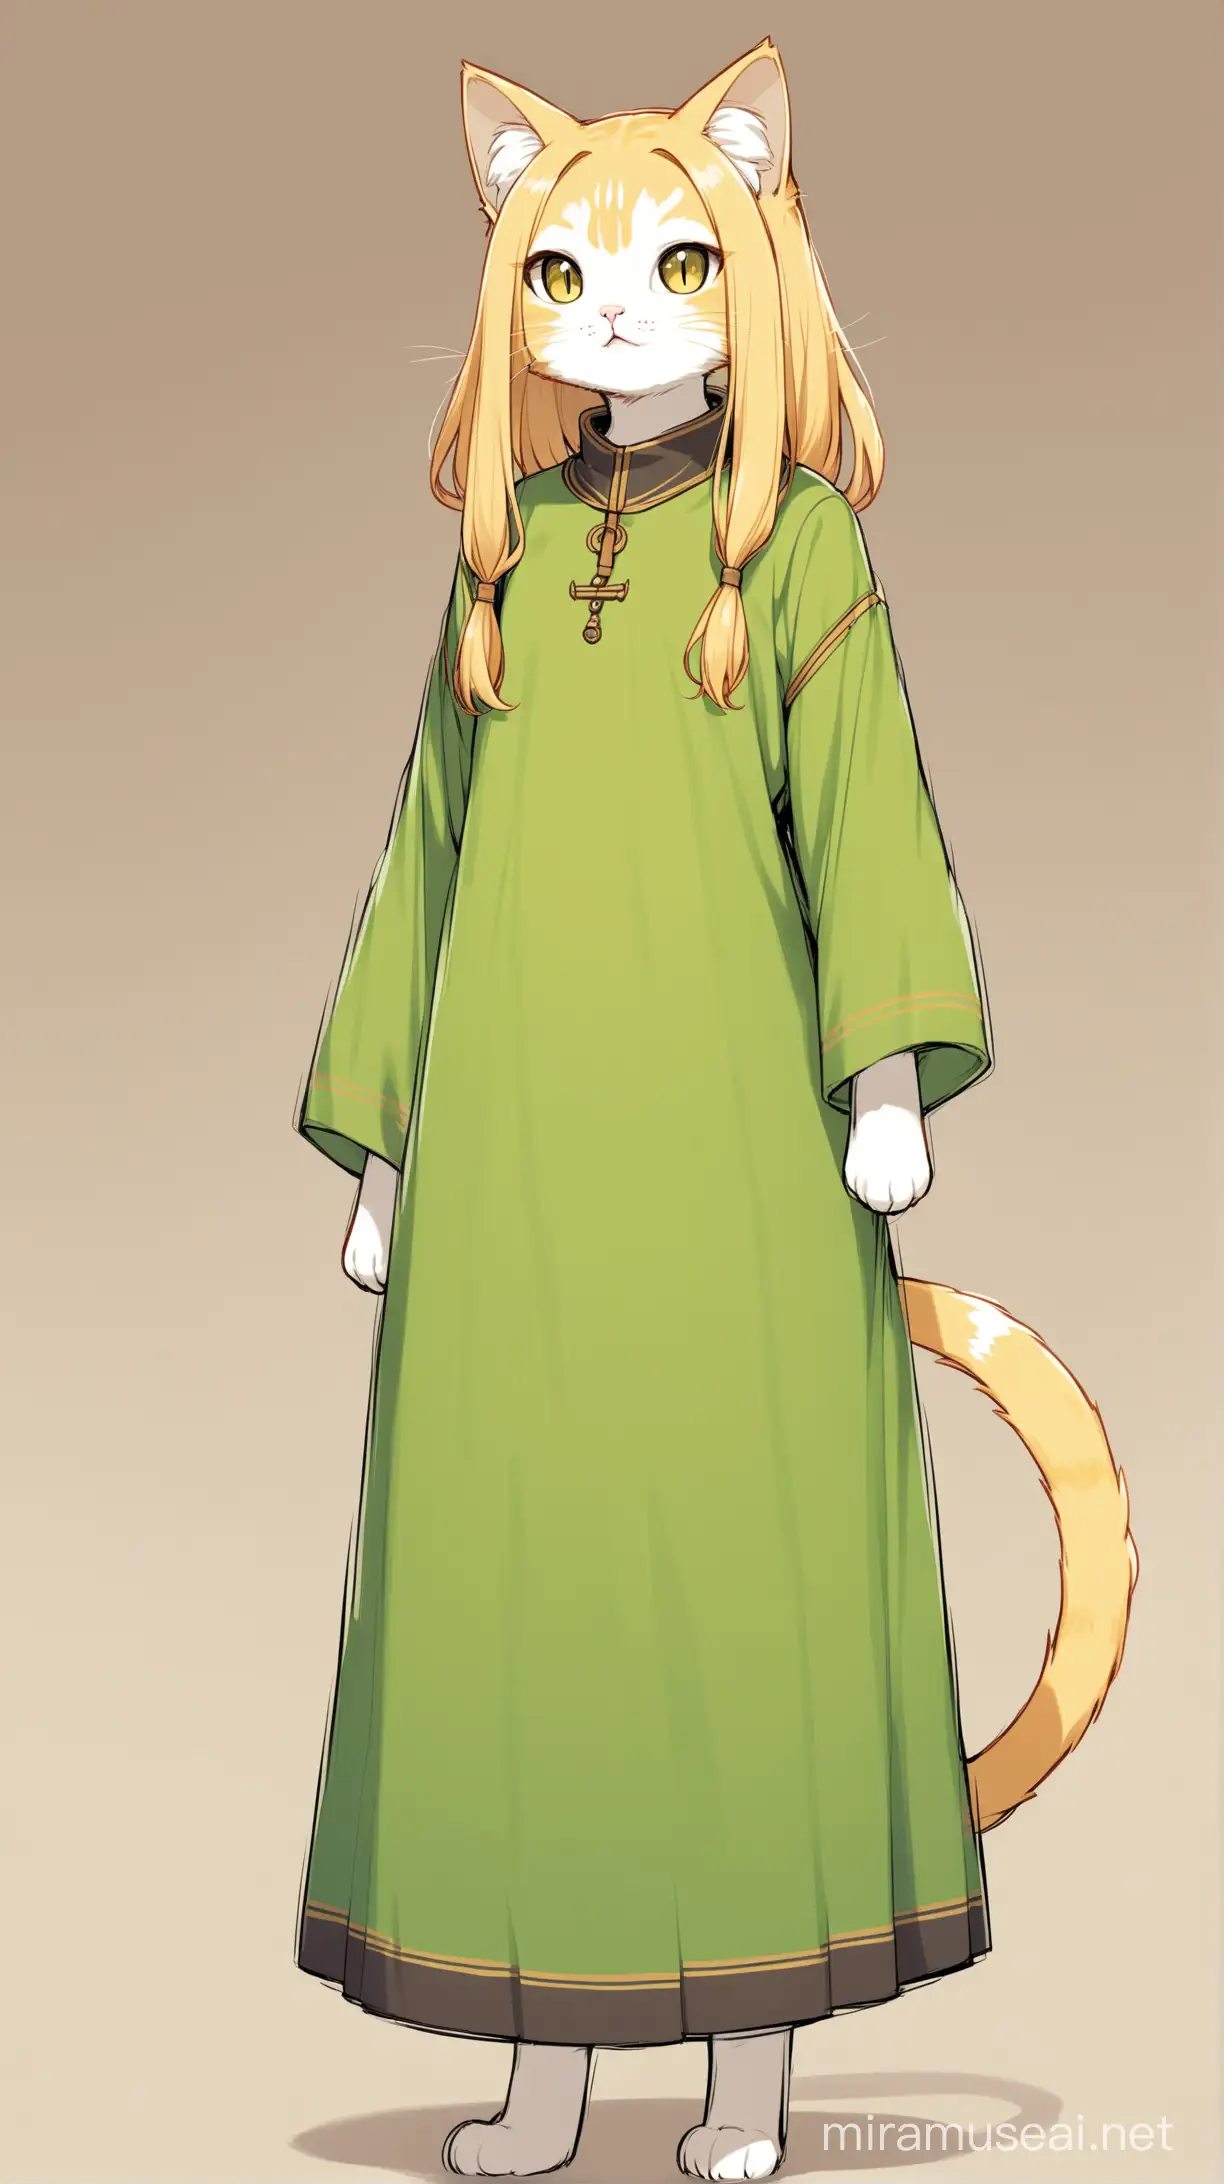 Elegant Humanoid Cat with Flowing Buttery Hair in Stylish Attire